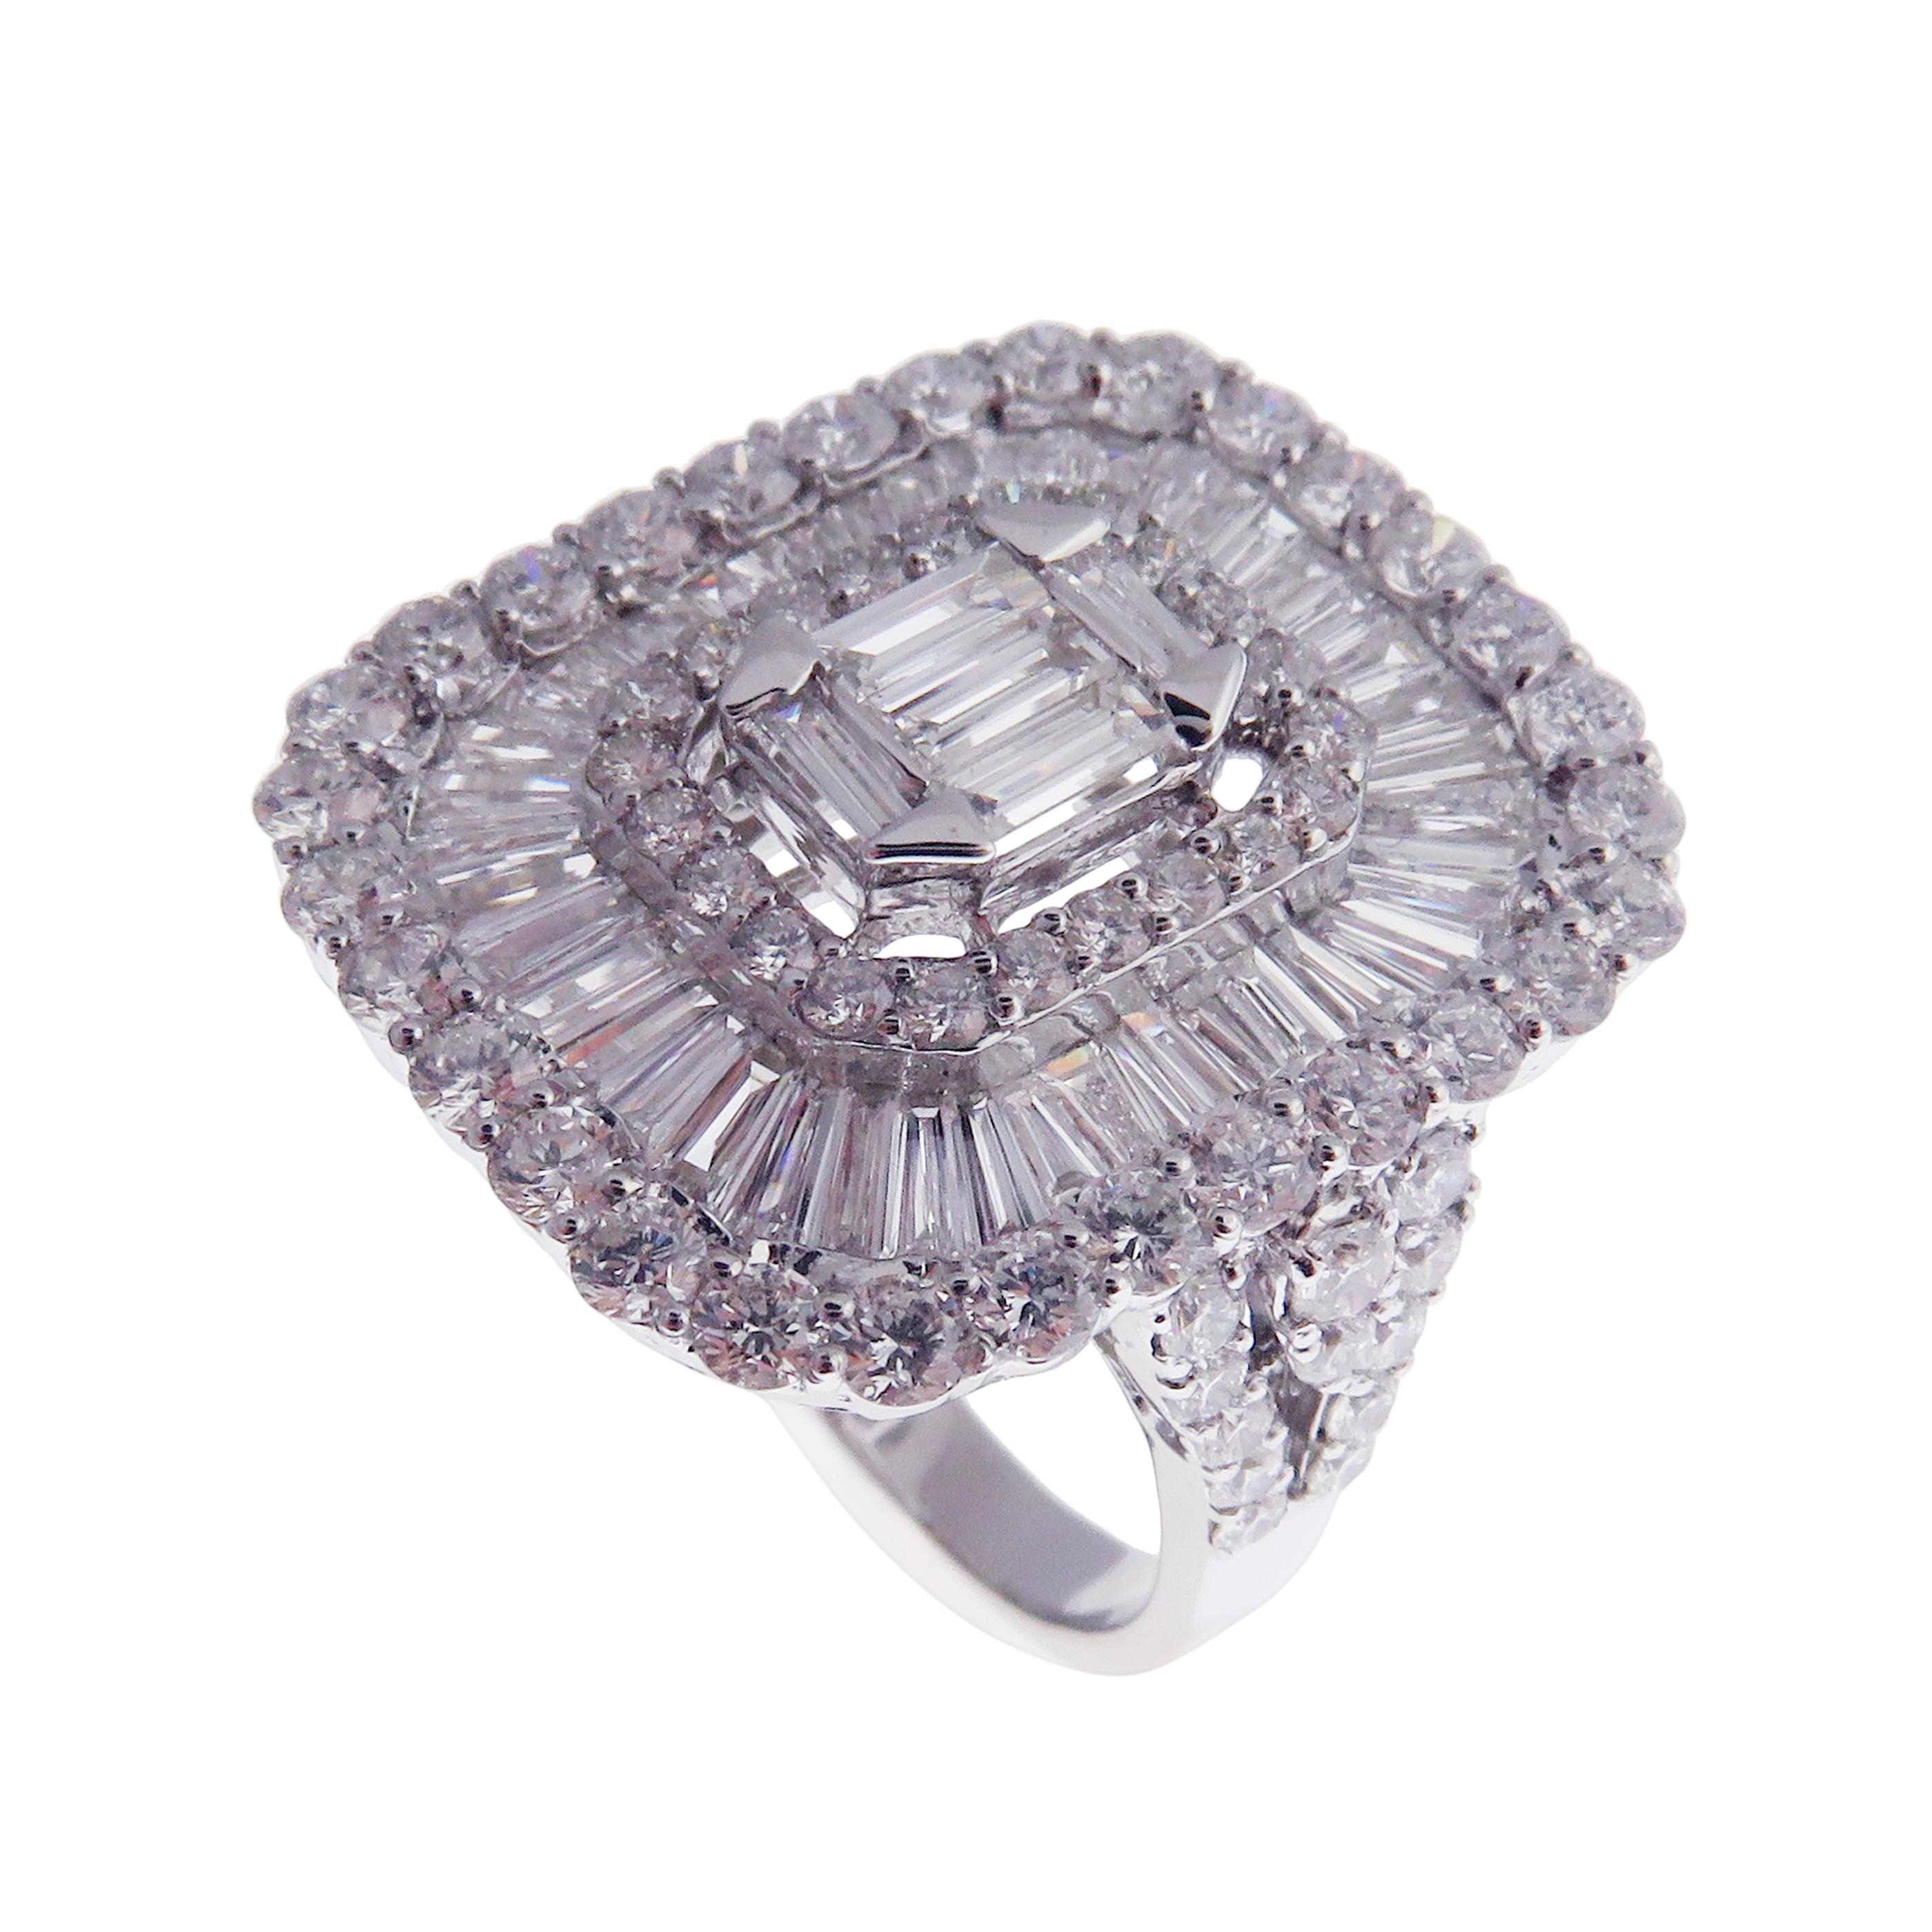 This baguette, diamond ring is crafted in 18-karat white gold, weighing approximately 3.56 total carats of SI-V Quality white diamonds. This ring is comfortable and can be sized 